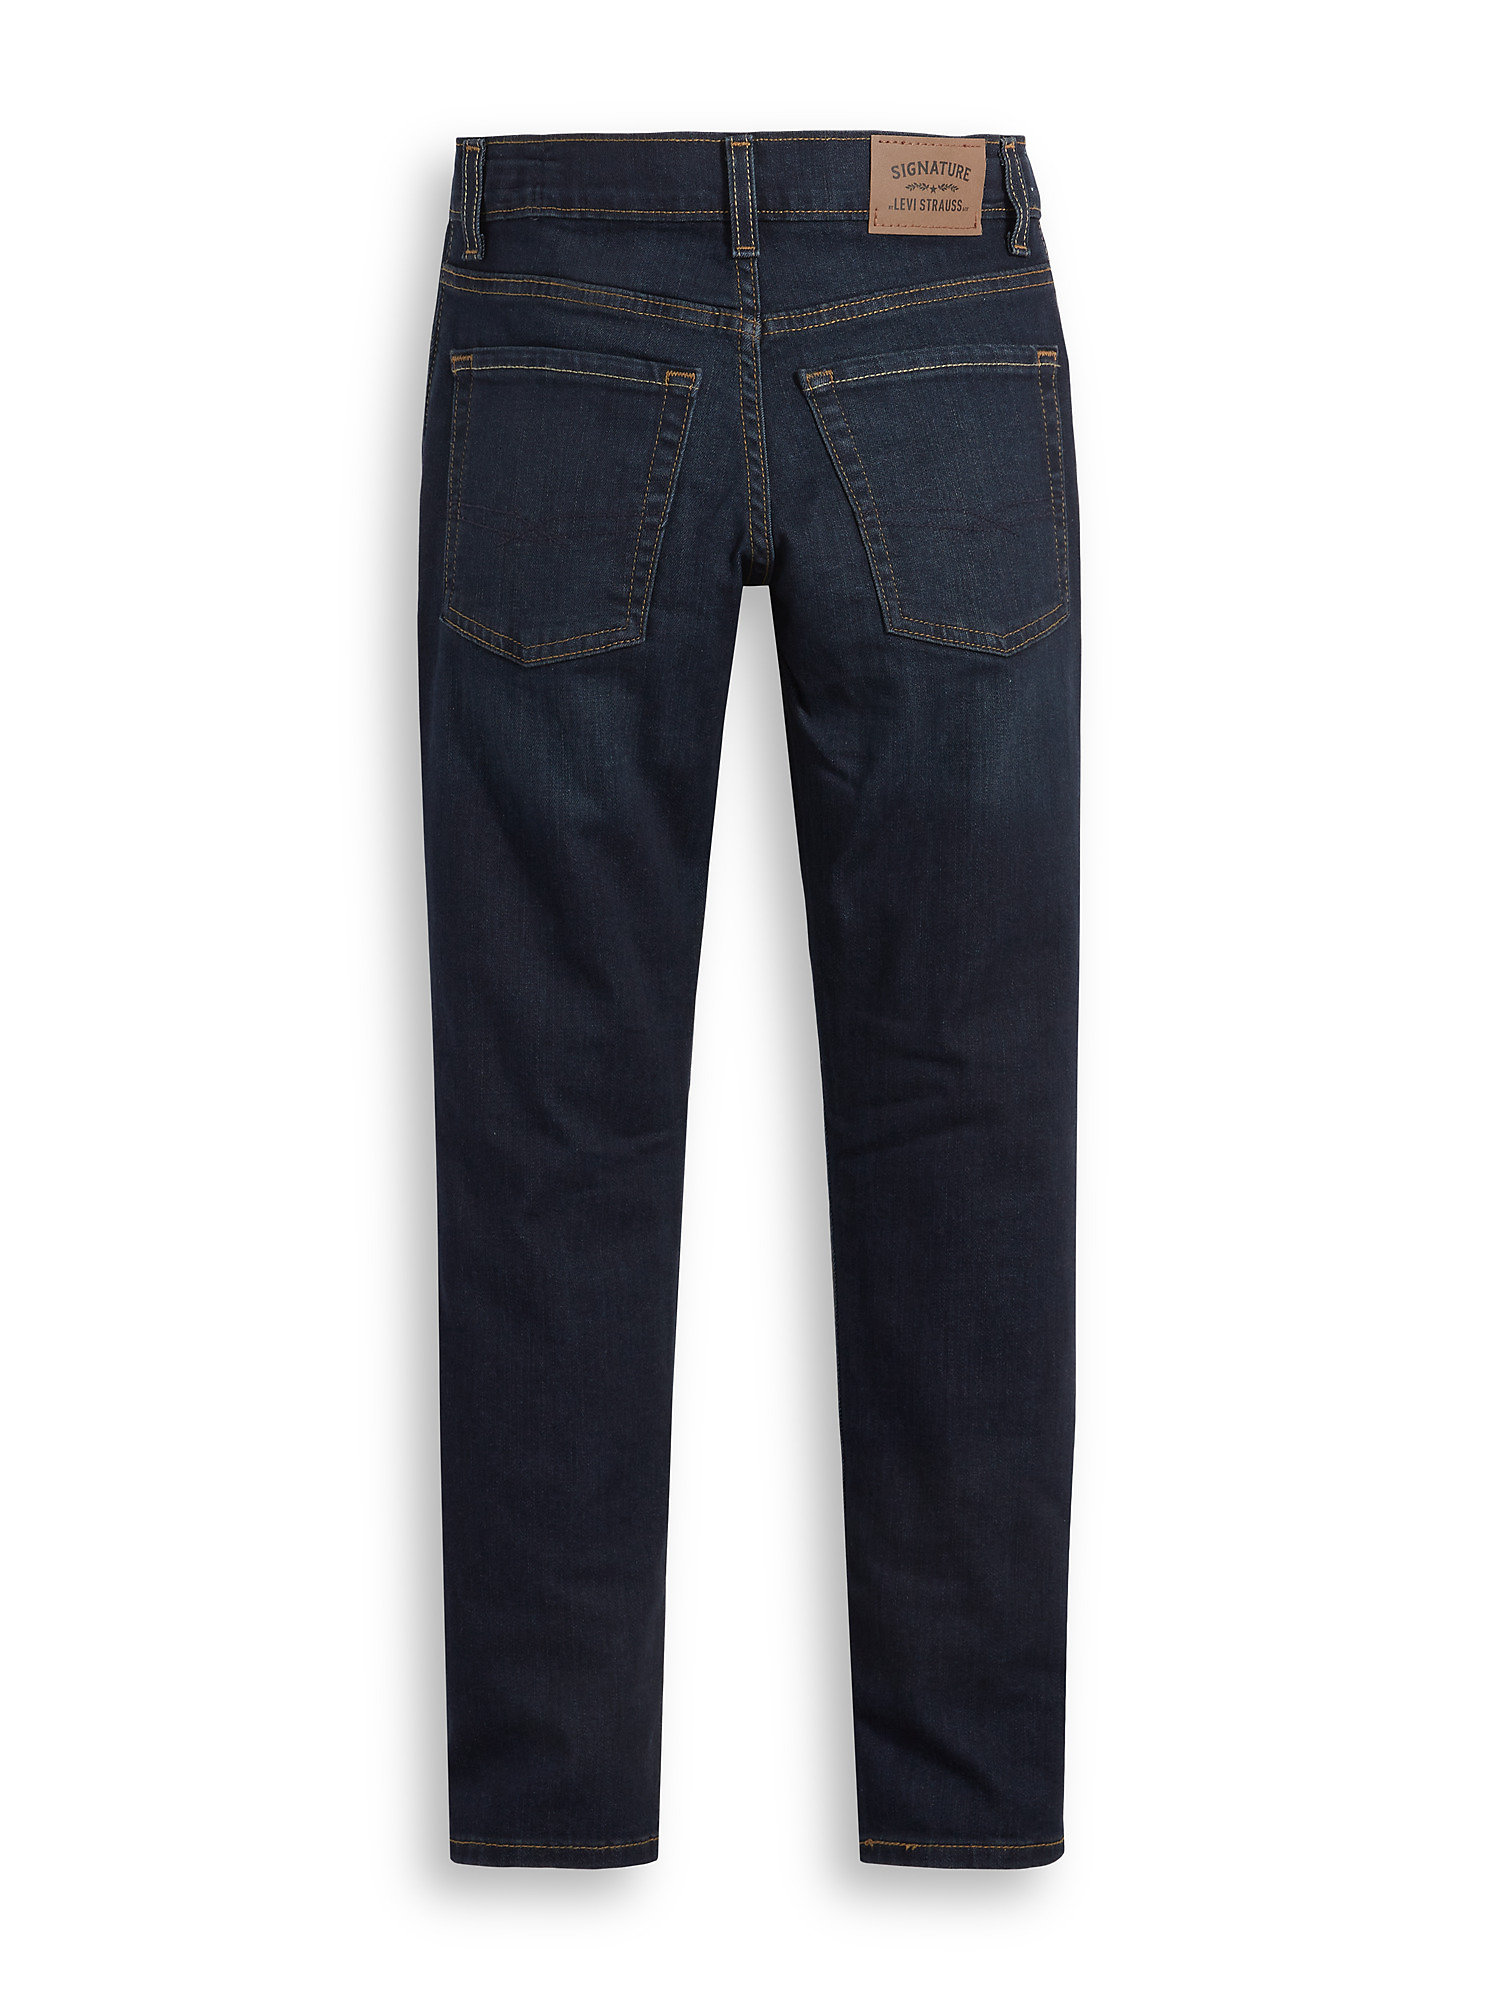 Signature by Levi Strauss & Co. Boys 4-18 Slim Fit Jeans - image 3 of 3